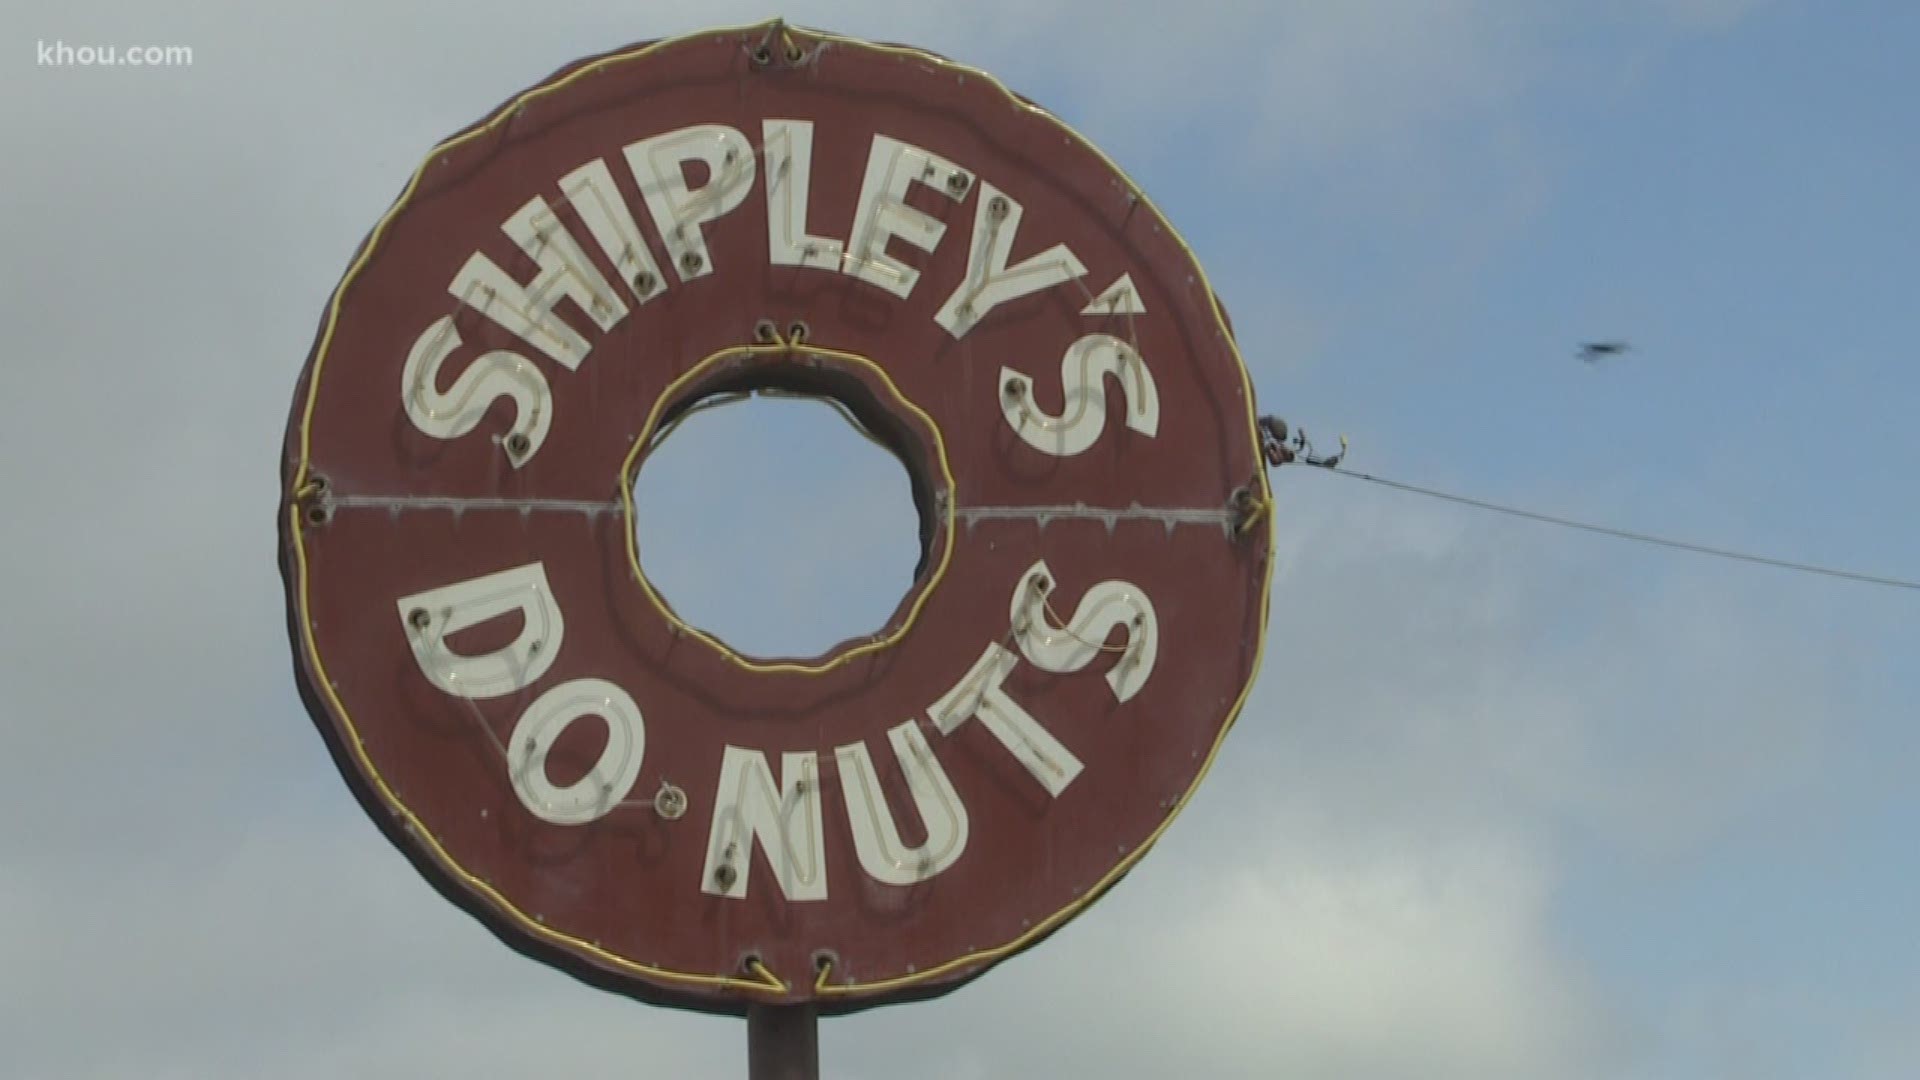 A viewer wanted us to verify if an old Shipley's Do-nuts on Ella and 34th is part of the Shipley Do-nuts brand. The extra "S" at the end is confusing her. We spoke to the store's owner who helped us solve this mystery.